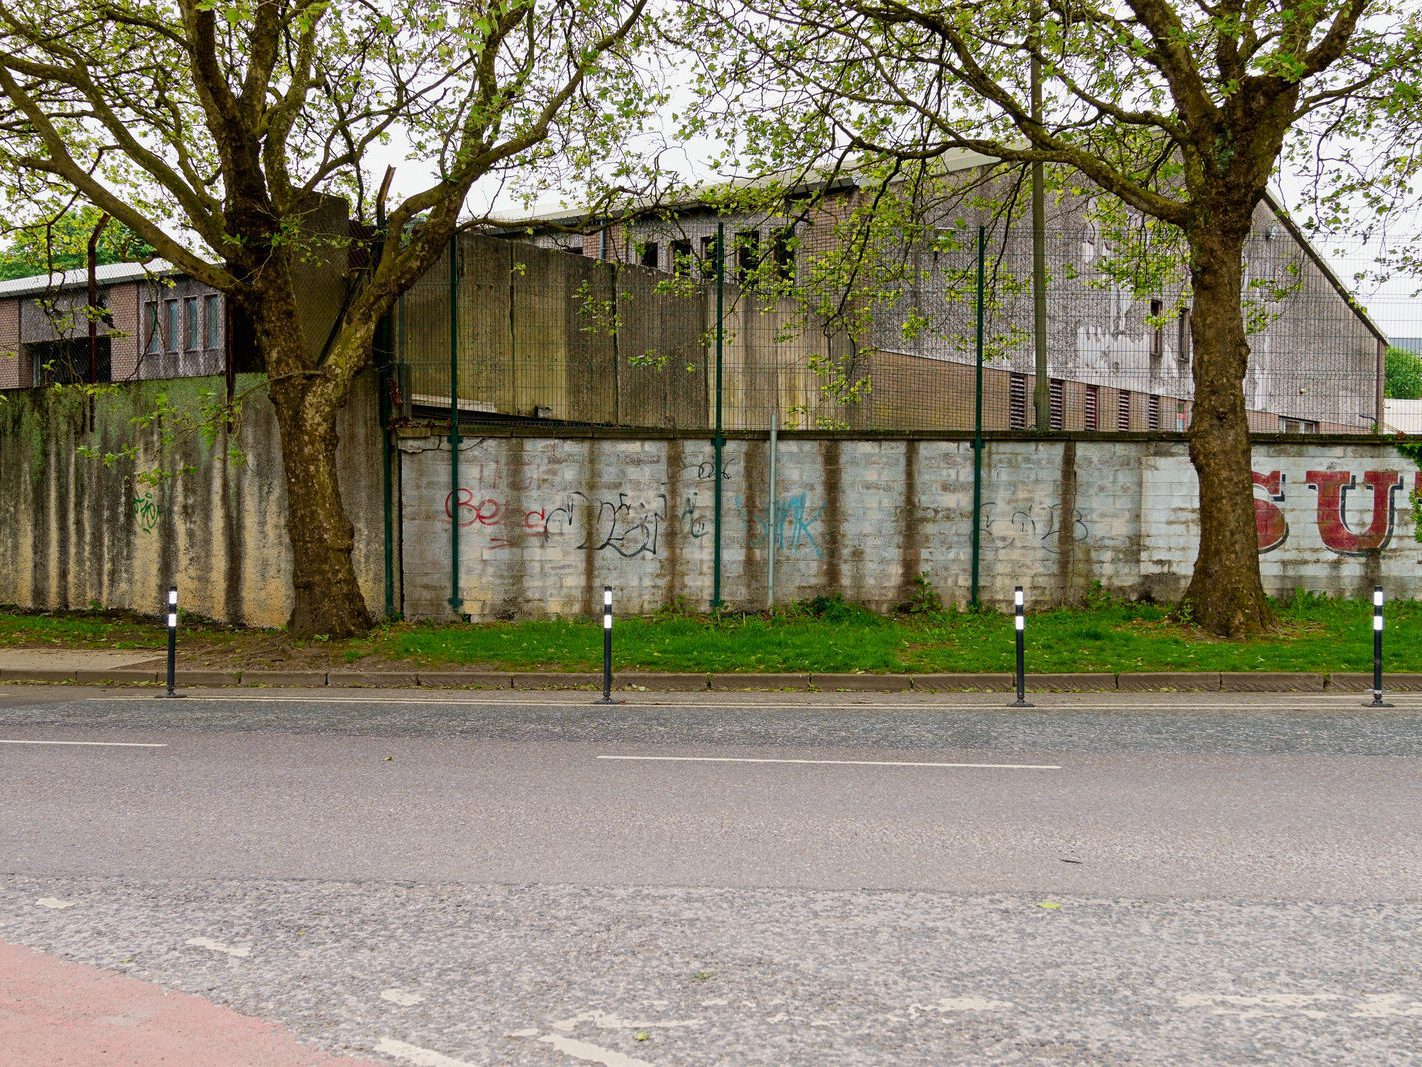 MONAHAN ROAD IN THE DOCKLANDS AREA OF CORK CITY [12 MAY 2022] 017